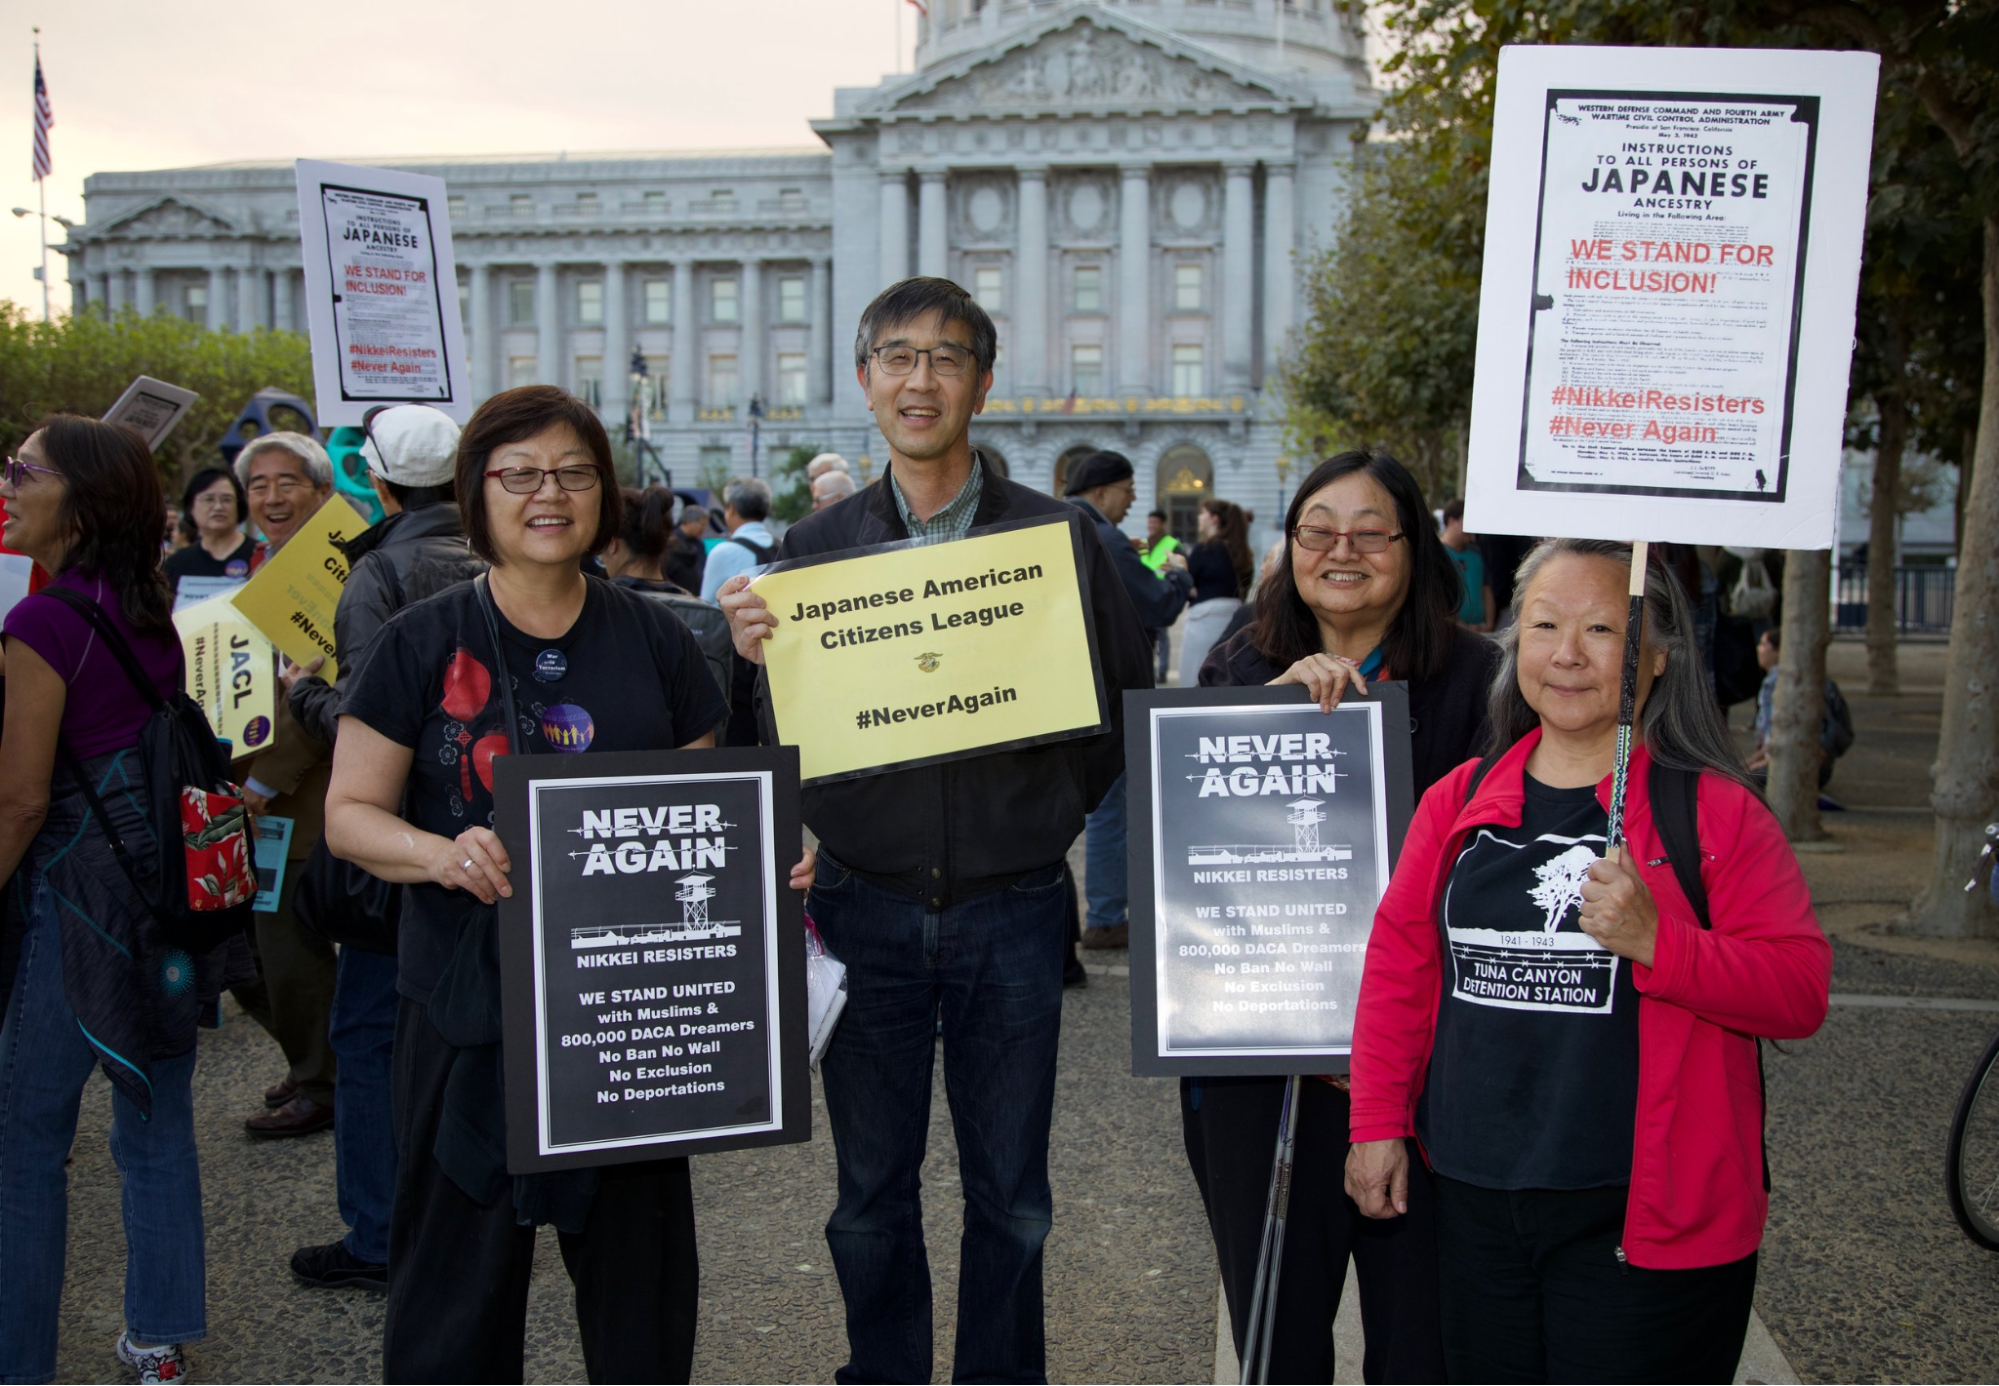 Four members of the Japanese American stand in support with the Muslim community at a rally to end the Bans, holding signs that say "Never Again"